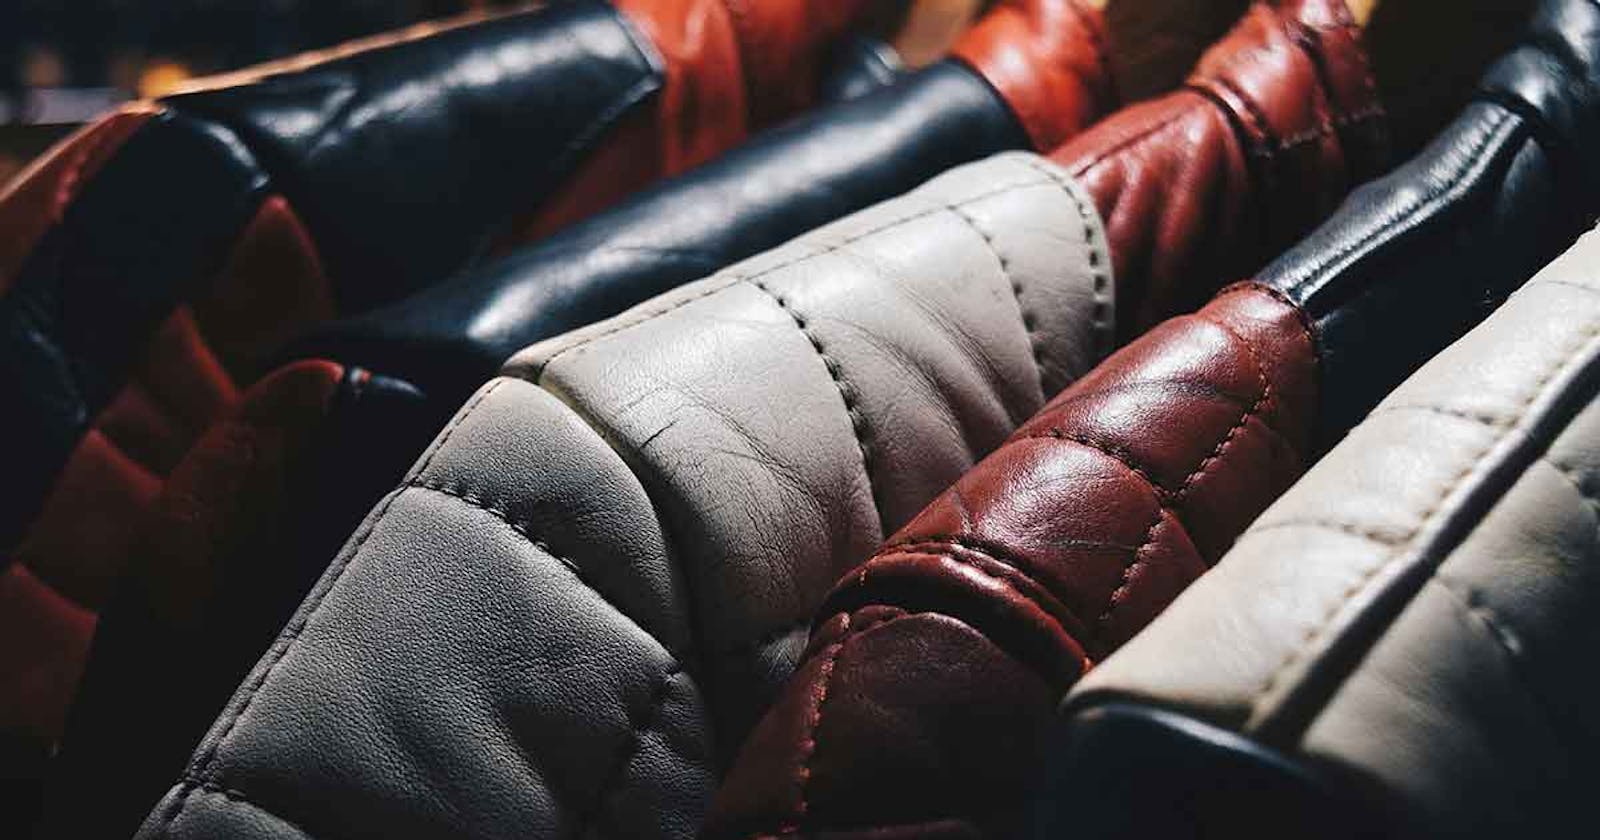 Explore a Professional Same Day Alteration Service Provider for Leather Alteration